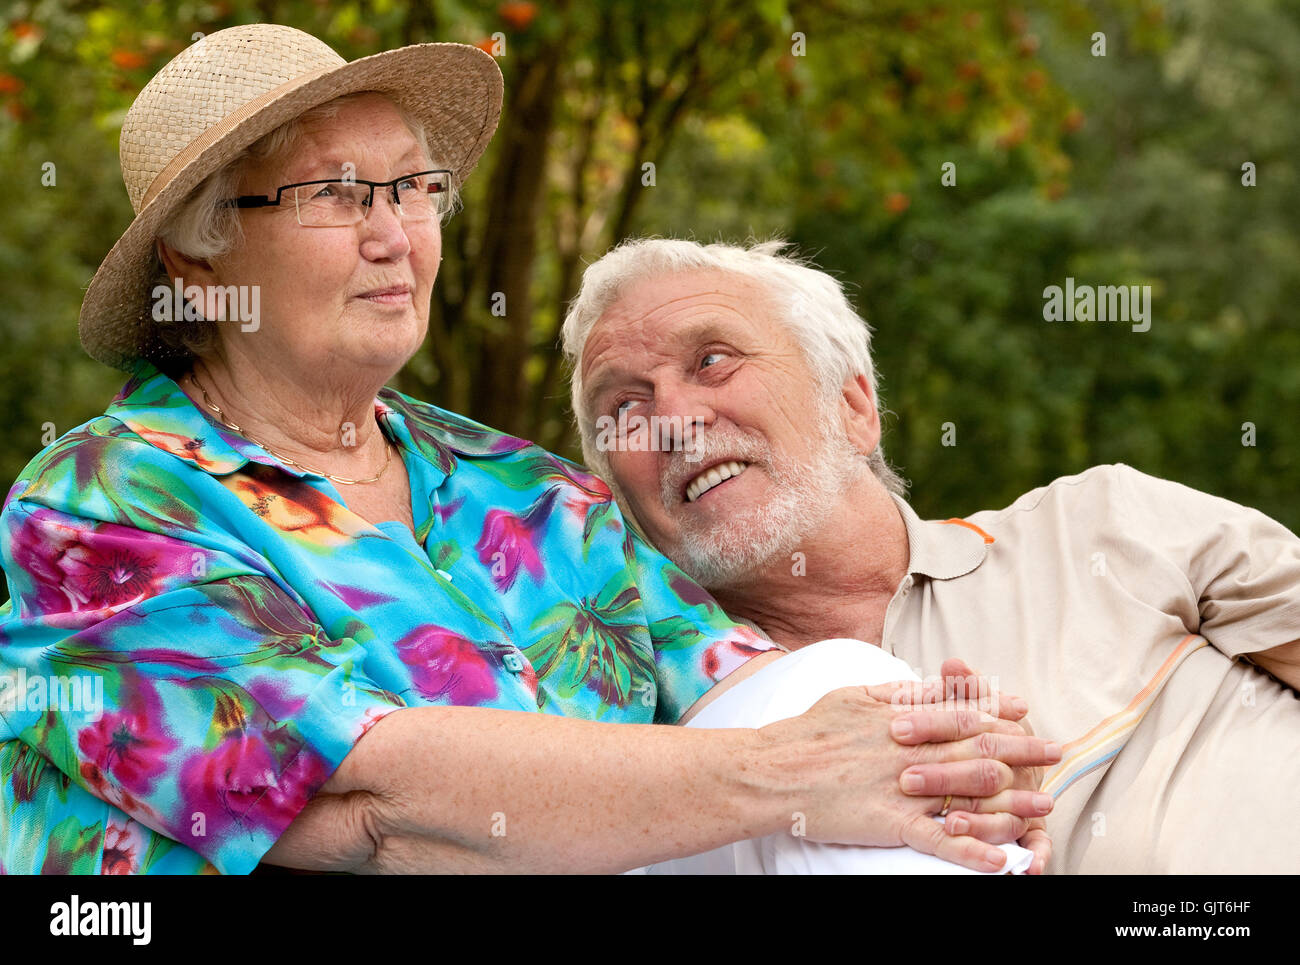 delighted unambitious enthusiastic Stock Photo